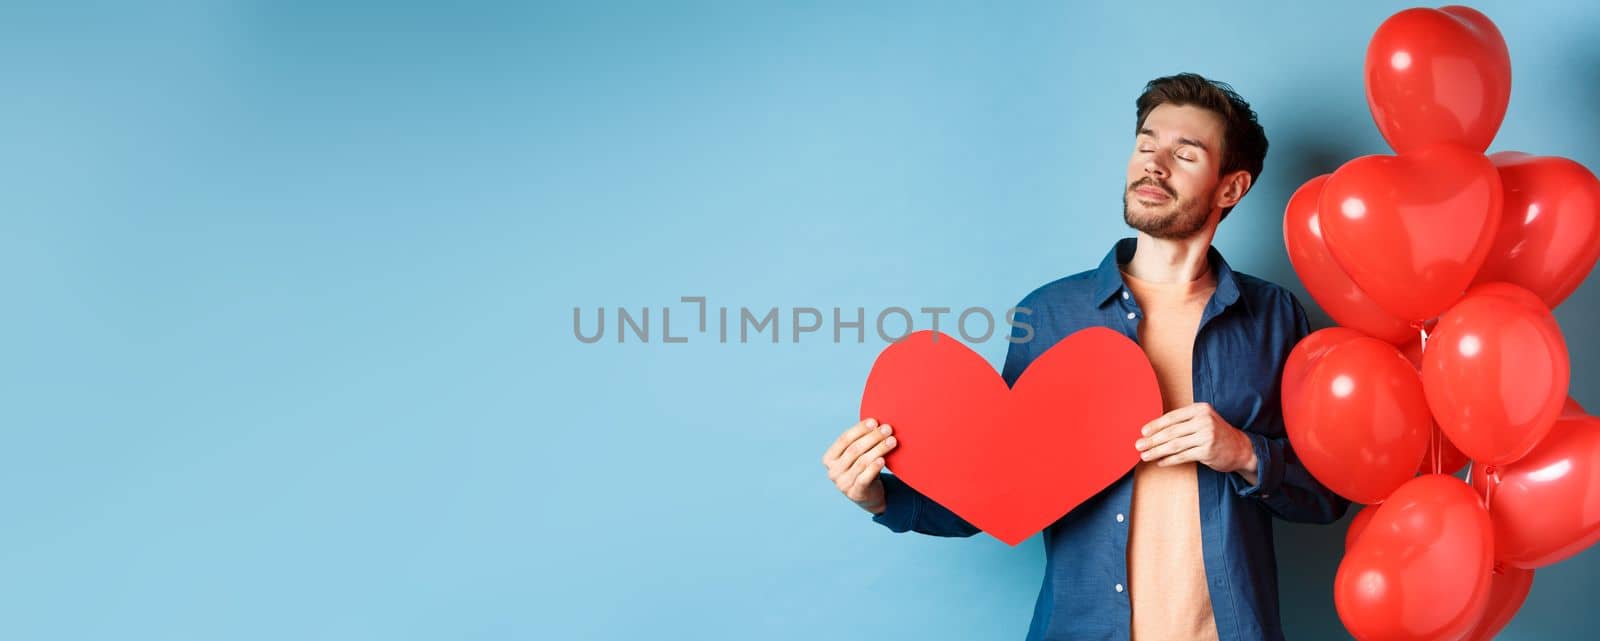 Valentines day and love concept. Dreamy man with closed eyes, holding romantic red heart cutout and standing near hearts balloons, blue background.